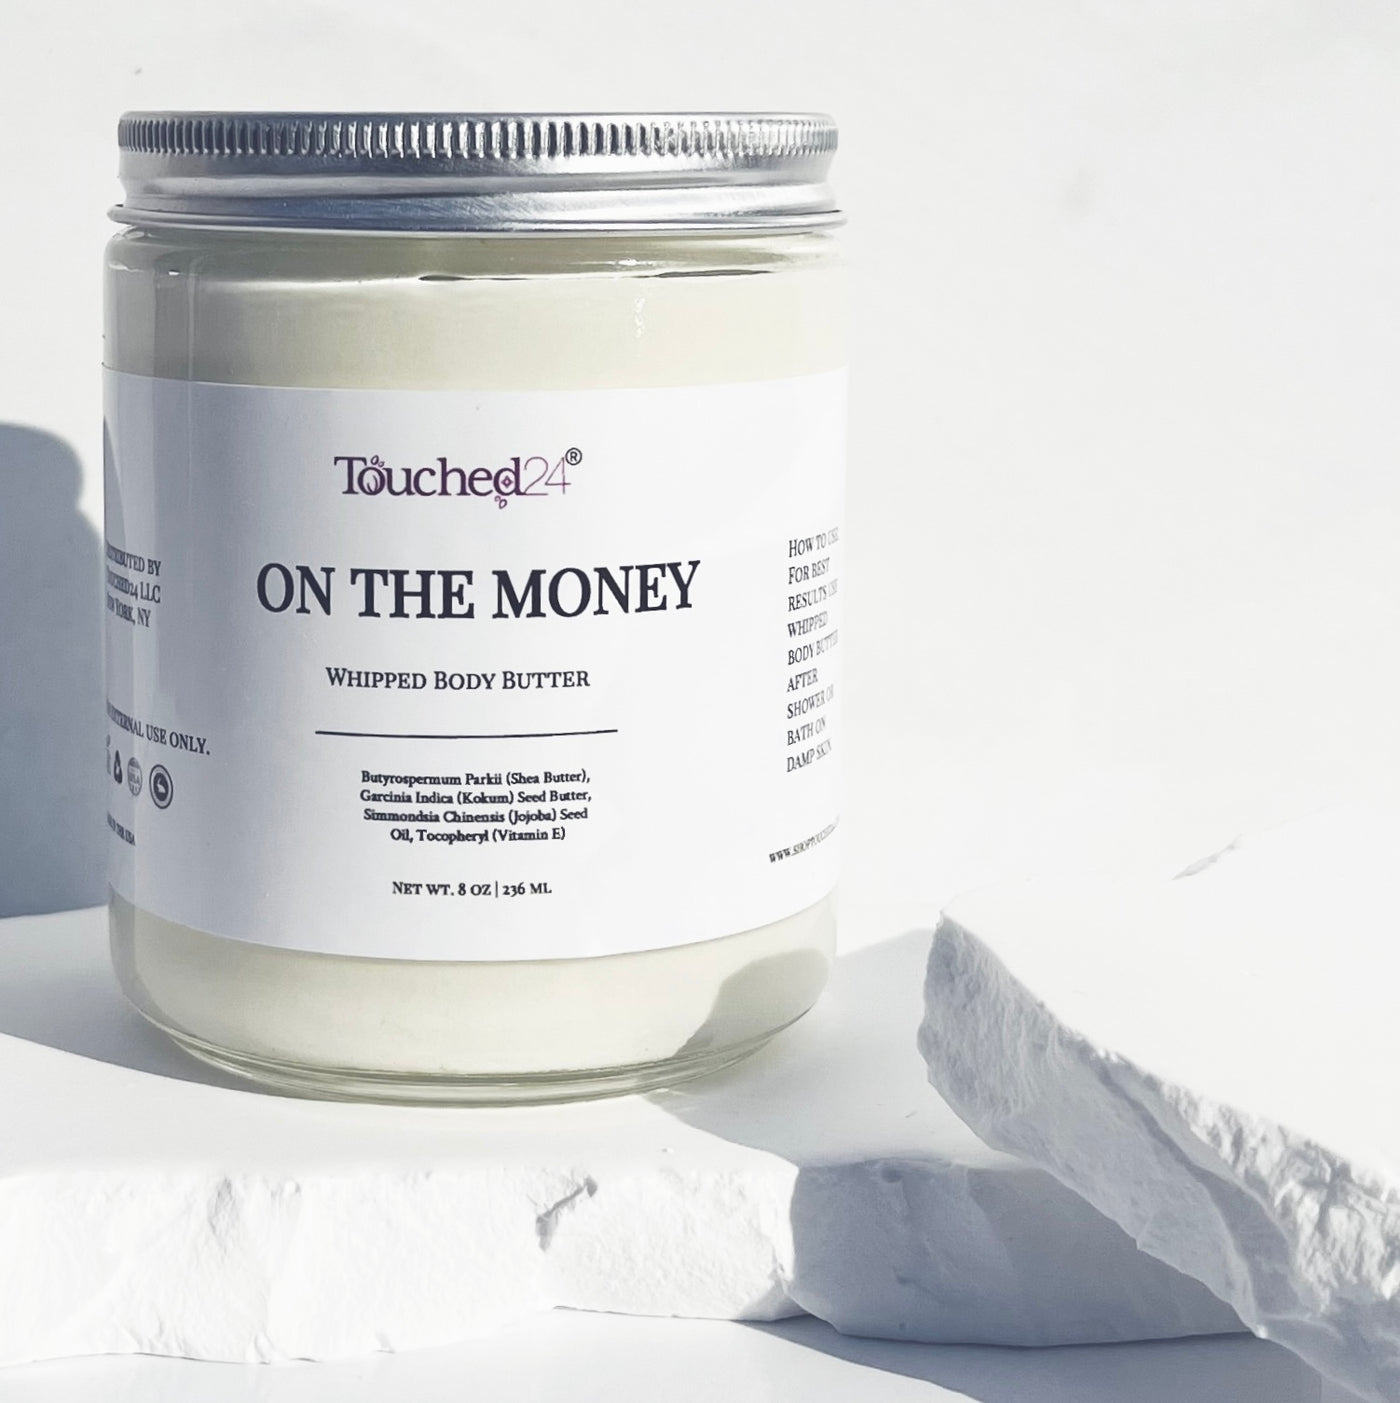 On The Money Whipped Body Butter